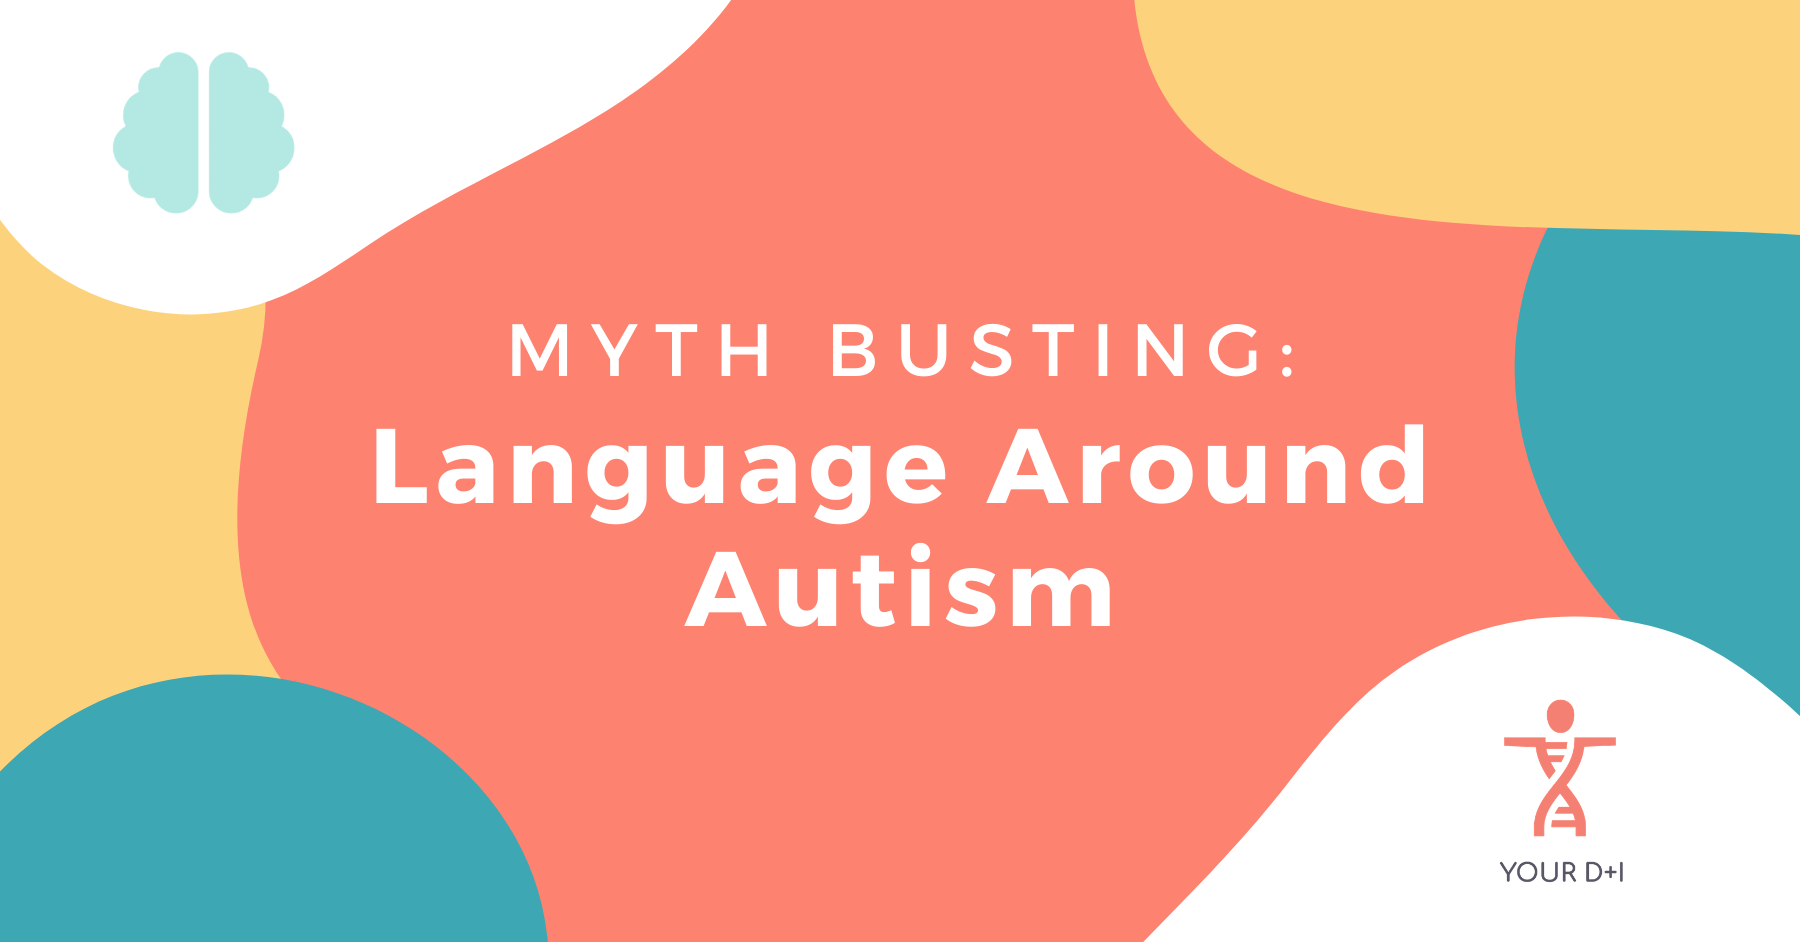 Myth Busting: Language Around Autism - Your D+I - Diversity + Inclusion